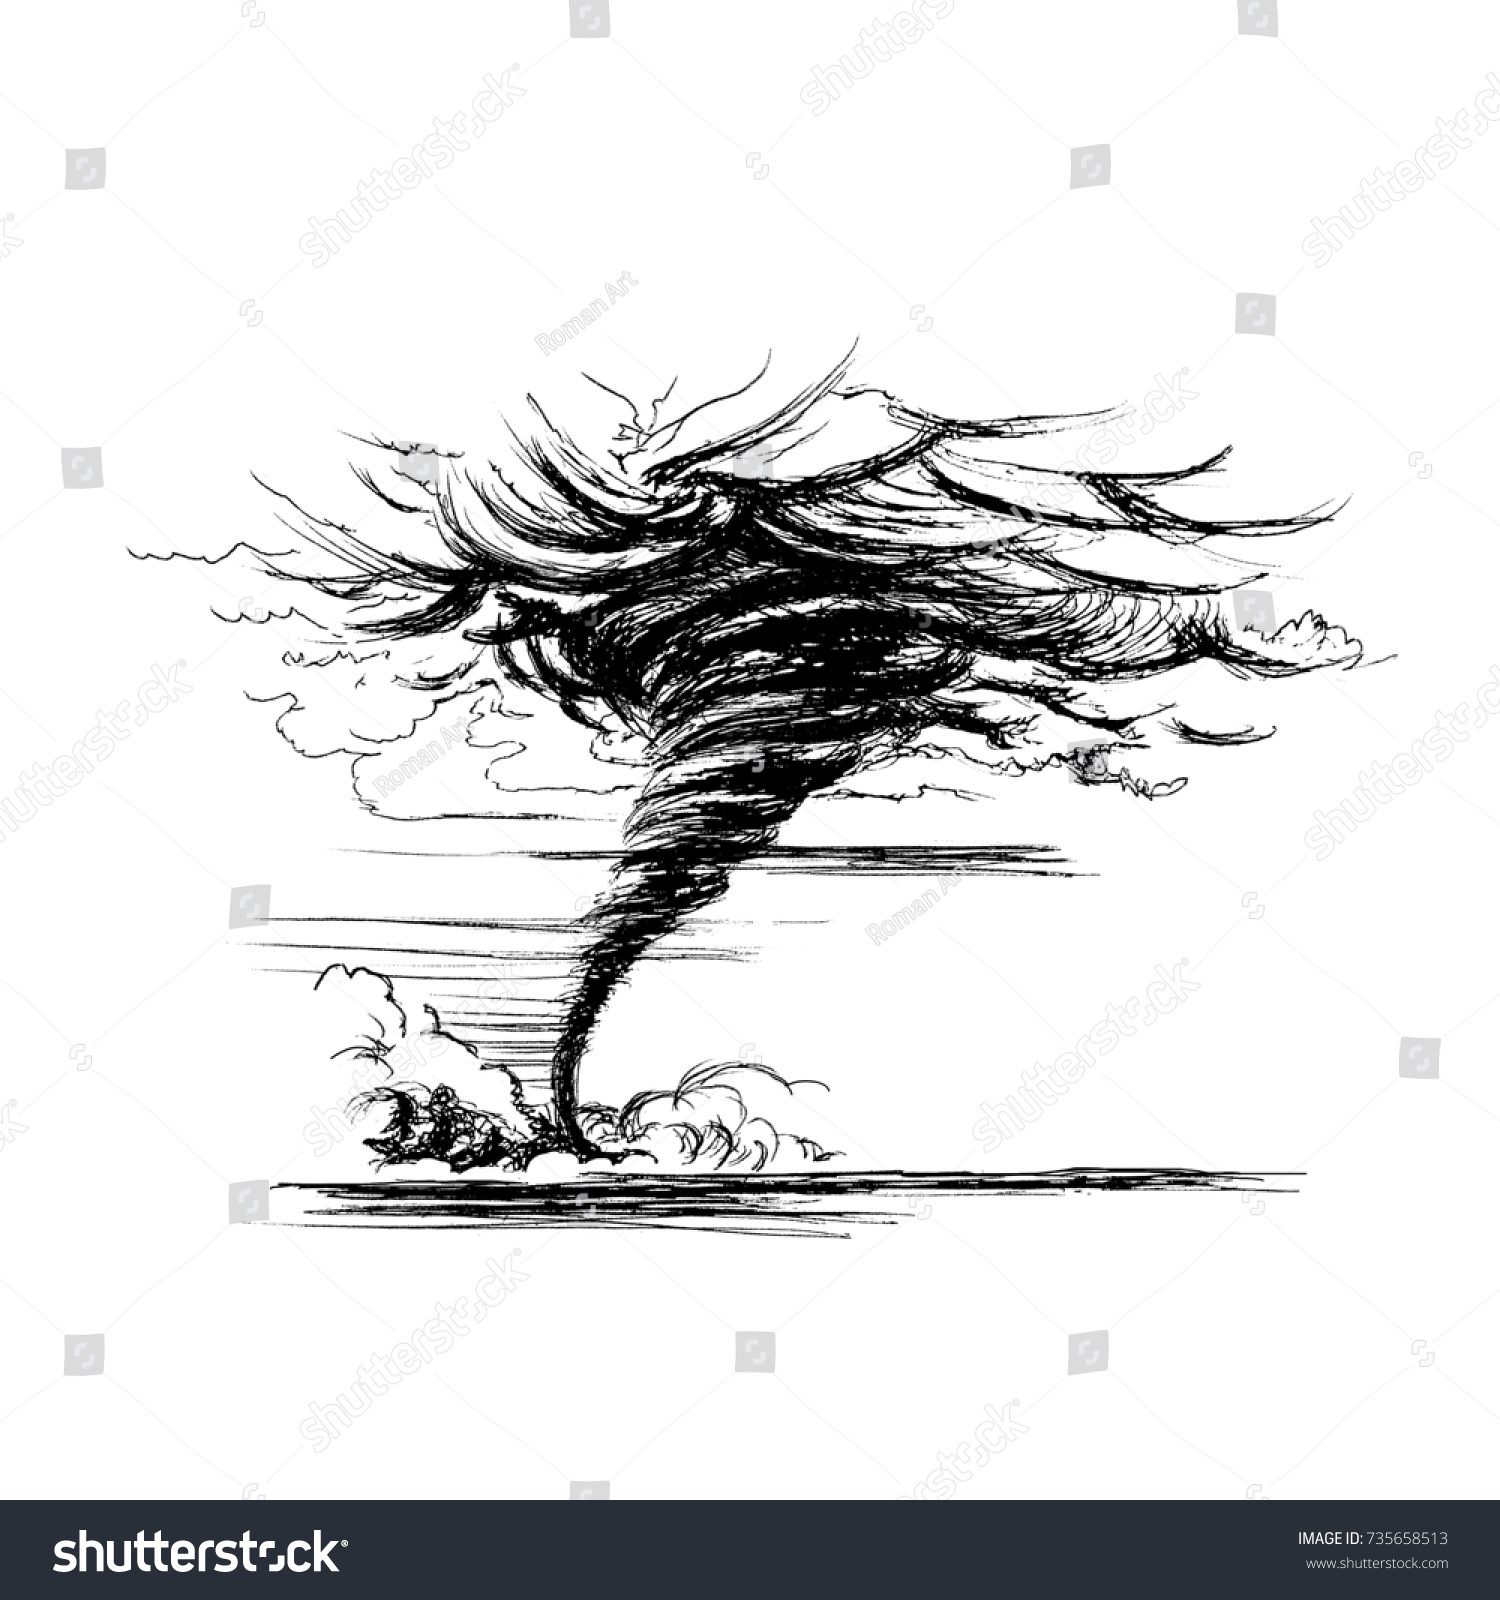 Tornado Sketch Handdrawn Style Isolated On Stock Illustration 735658513